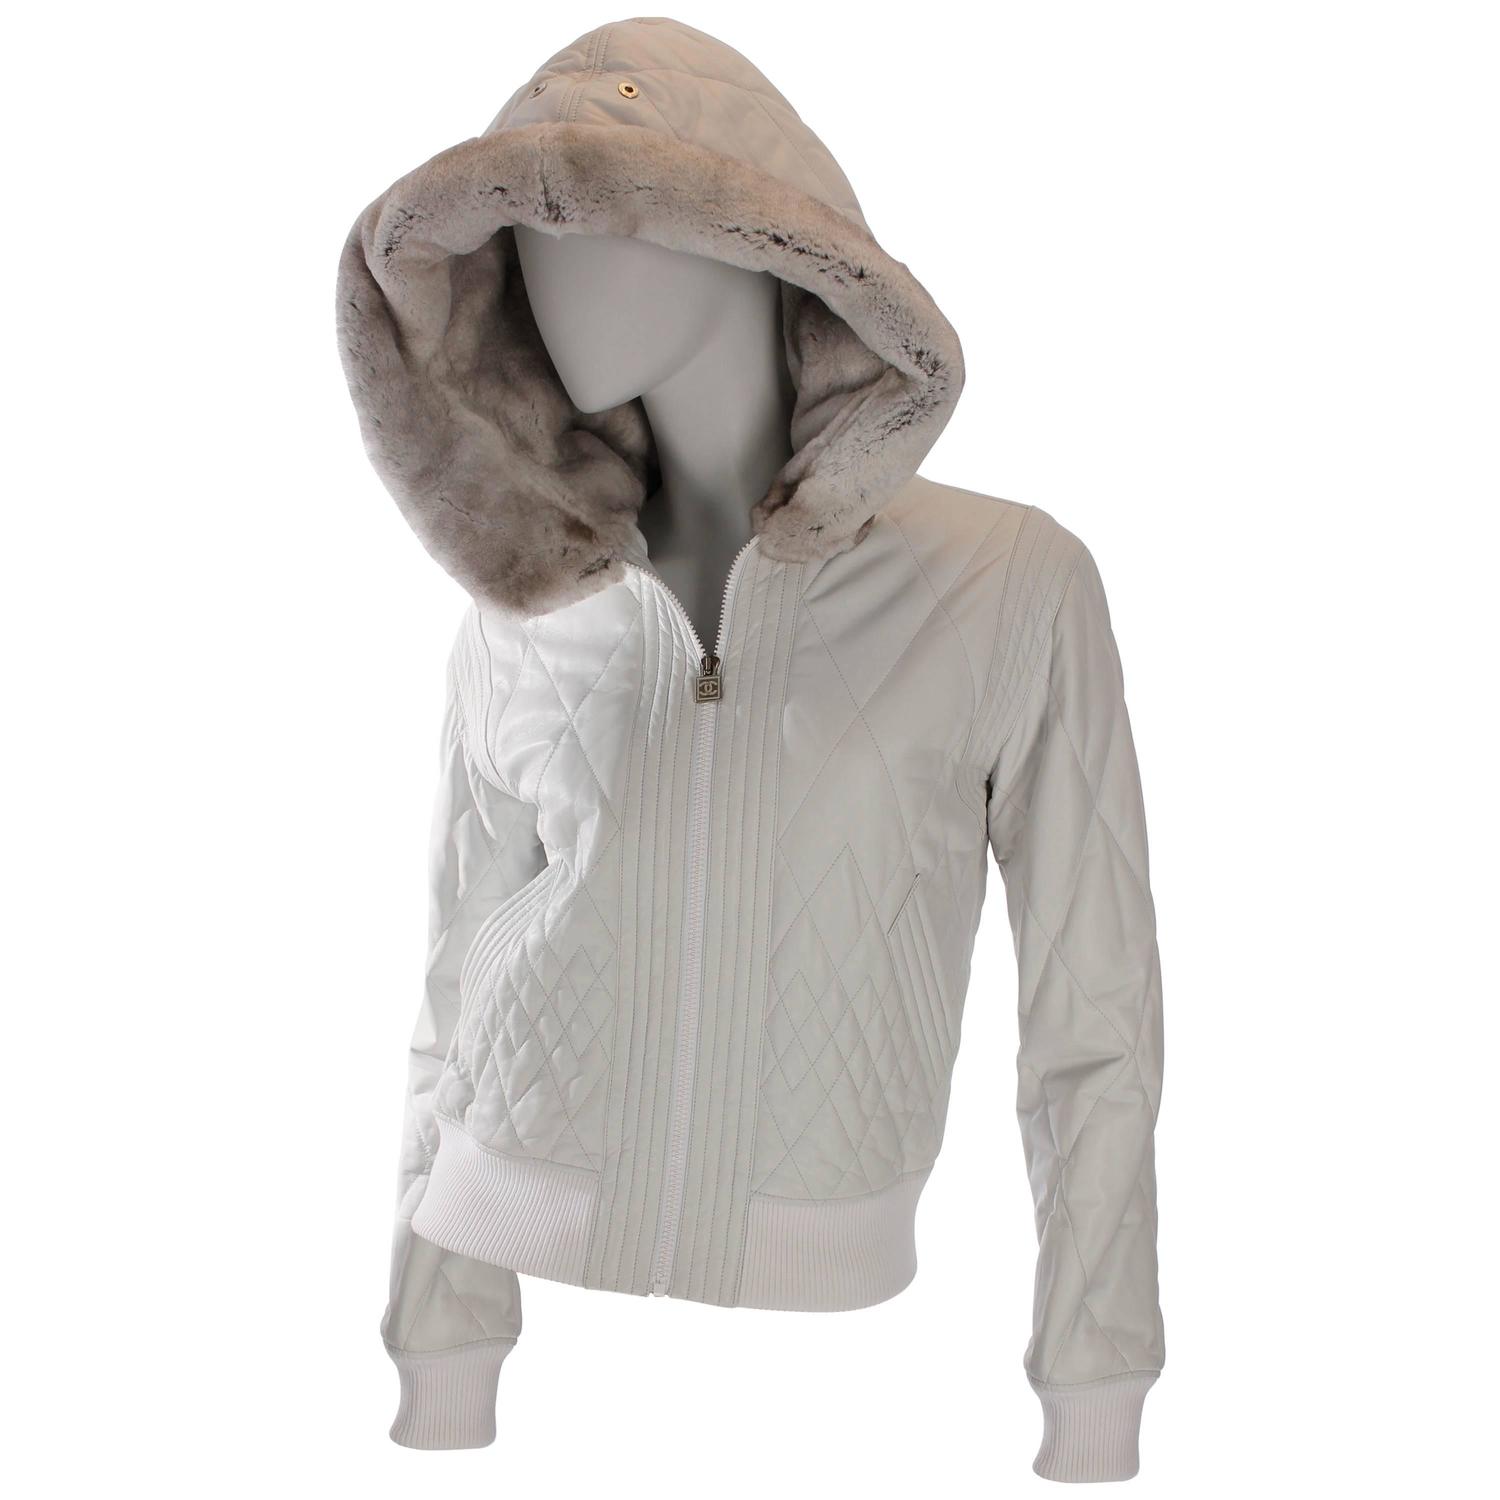 Chanel leather/orylag jacket - white with ultrasoft light gray orylag ...